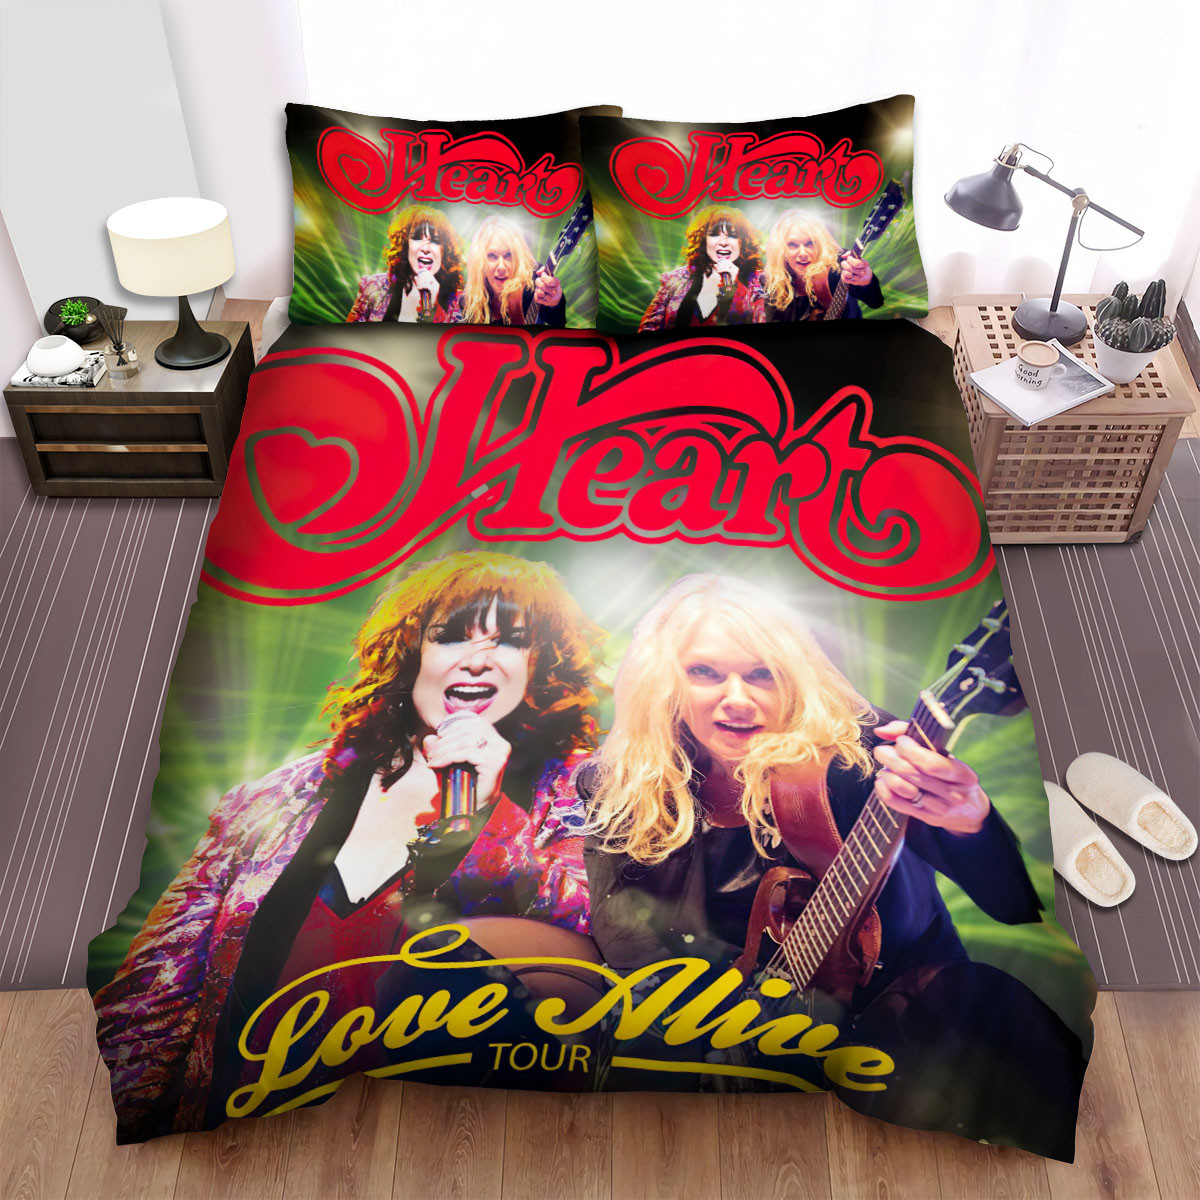 Heart Band Performing On Stage Bed Sheets Spread Comforter Duvet Cover Bedding Sets